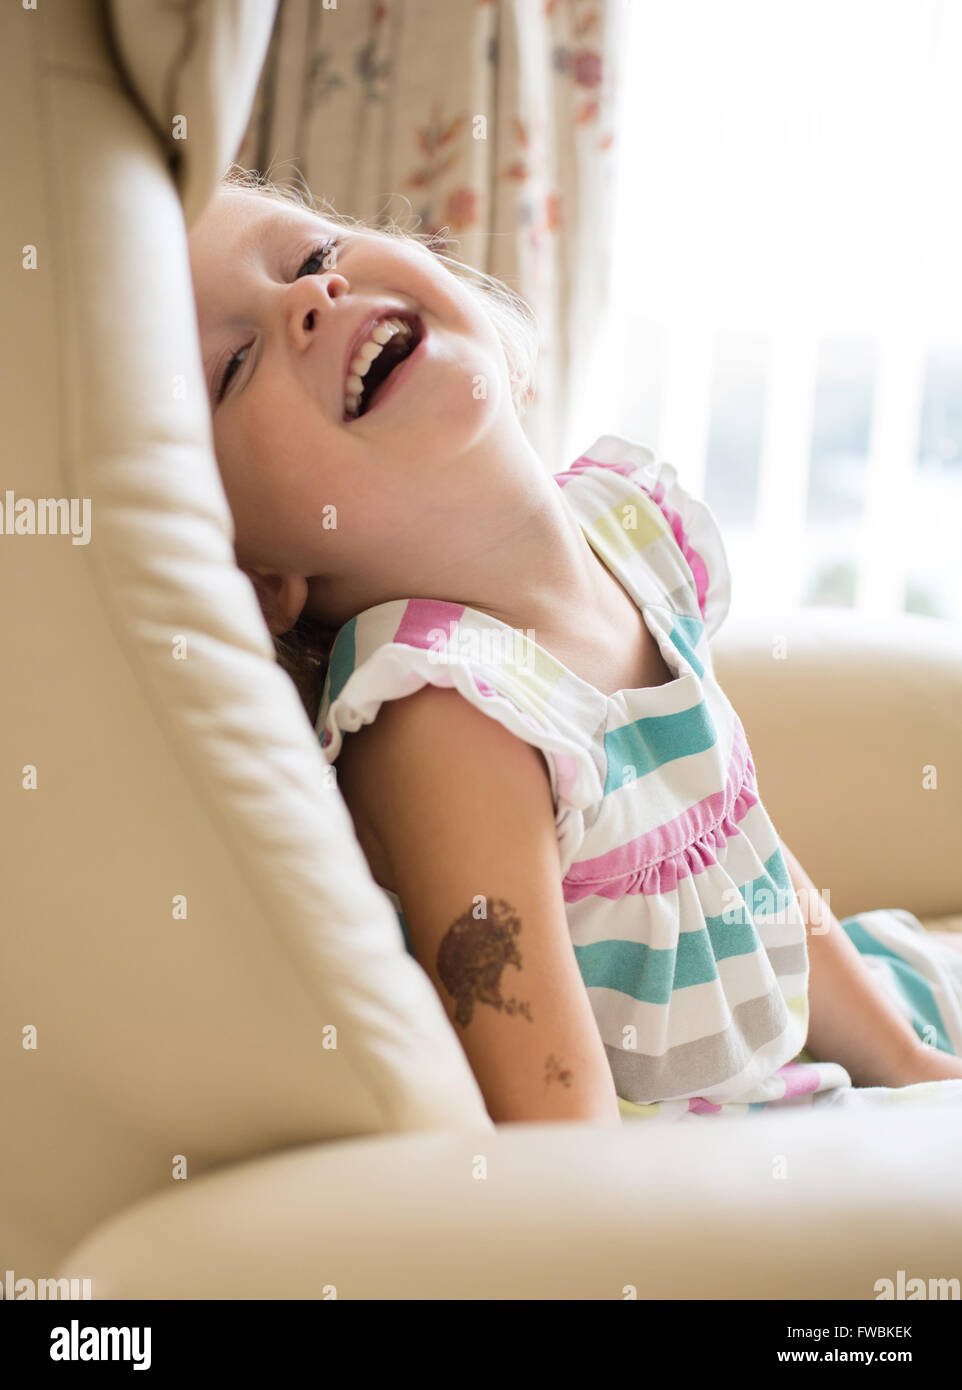 girl on a chair laughing Stock Photo